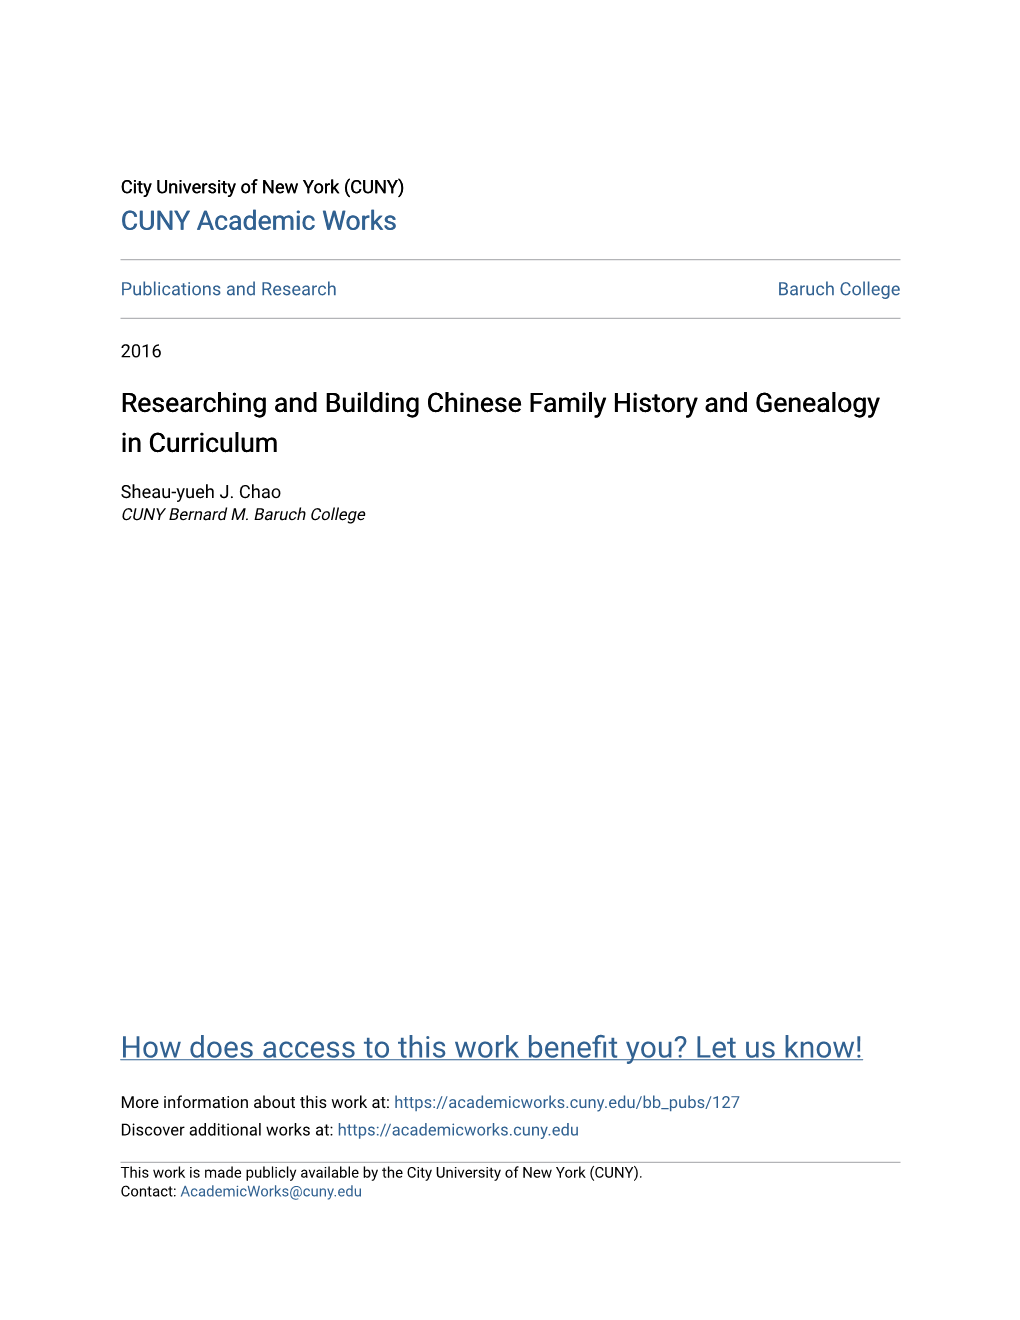 Researching and Building Chinese Family History and Genealogy in Curriculum